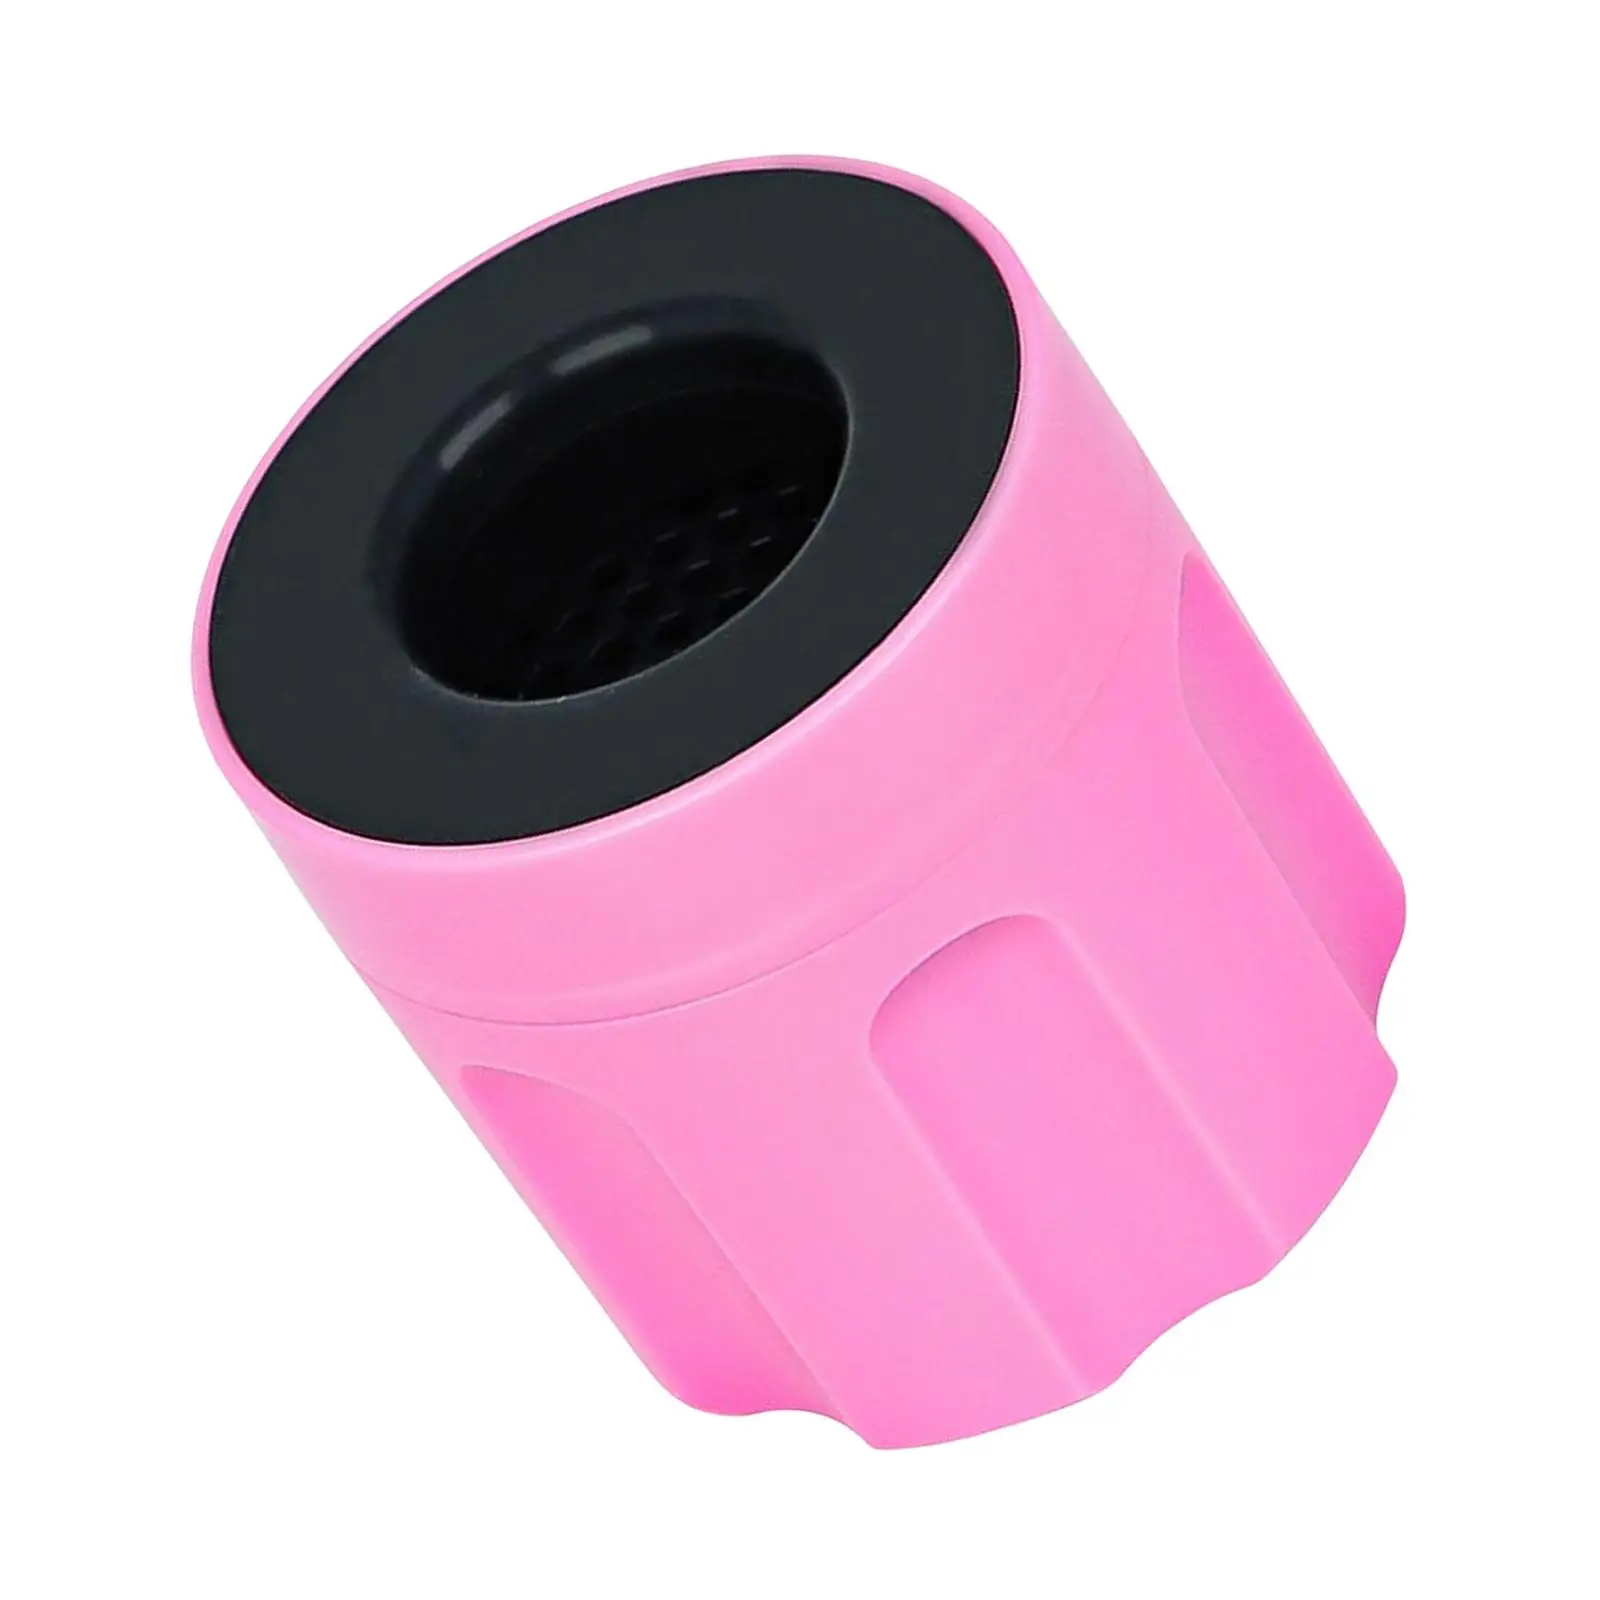 Filter Detachable Personal Air Filter Cleaner Air Filter Filter for Accessory